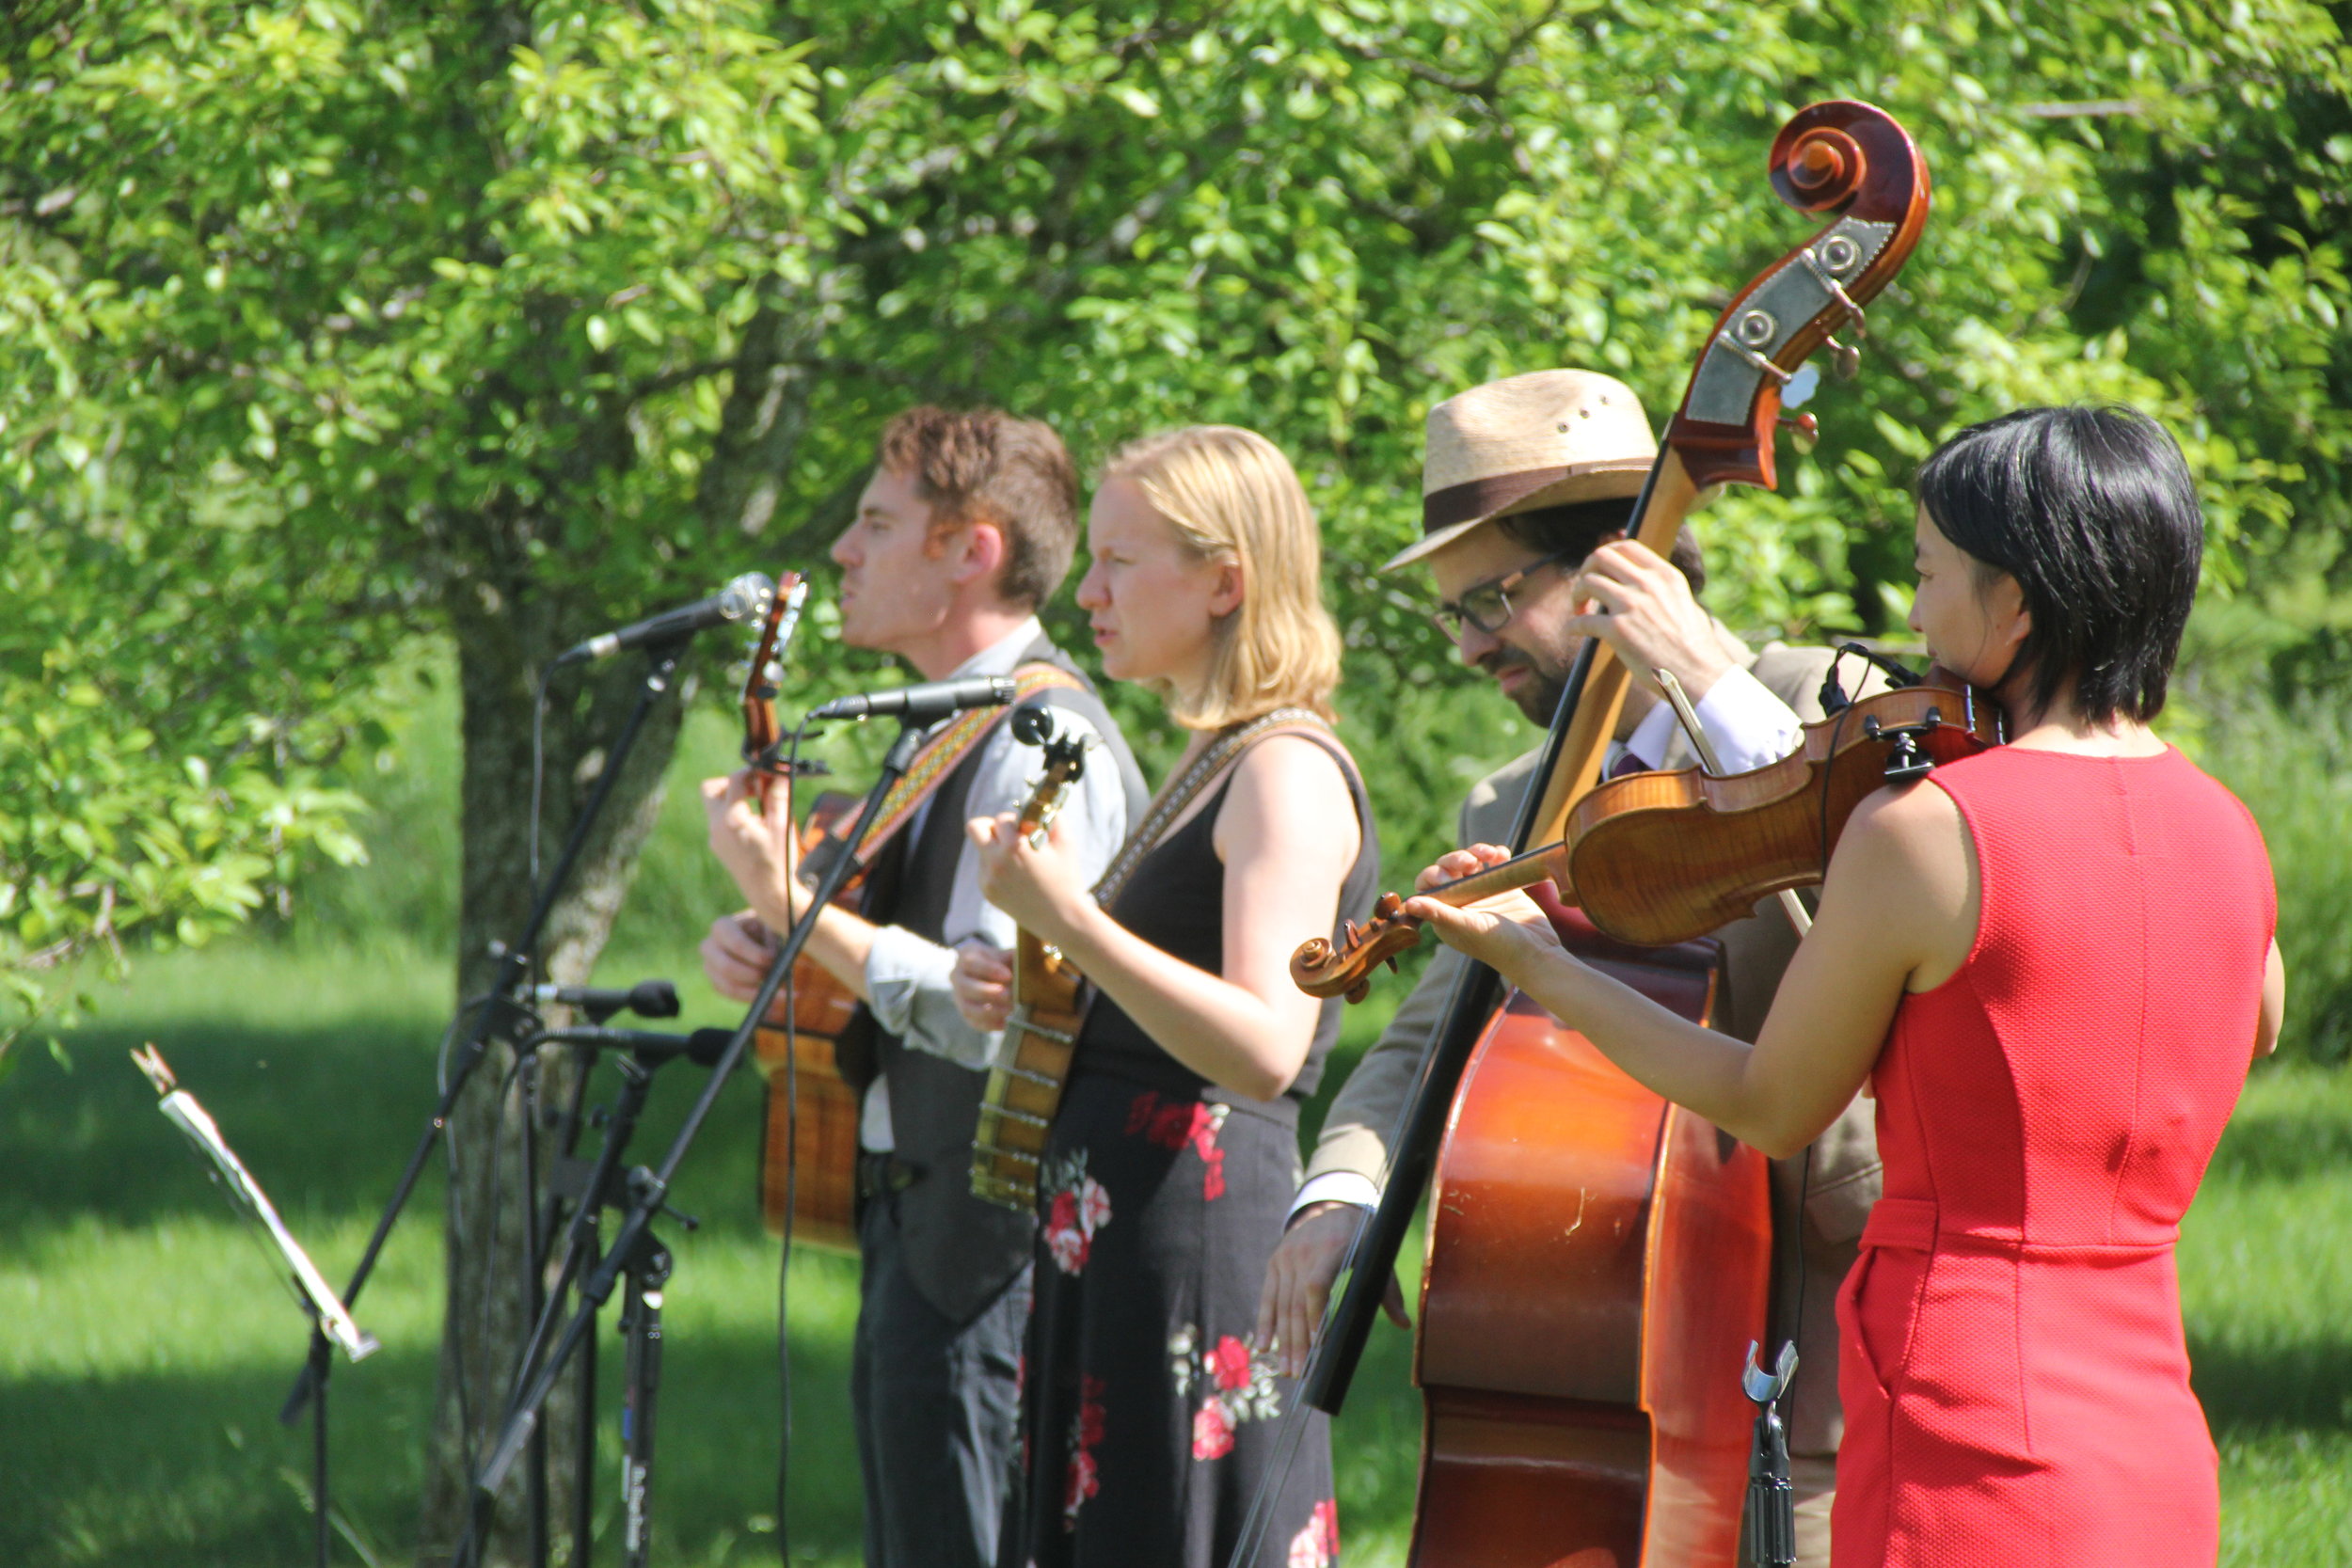 Musicians playing outside of the barn in the summer